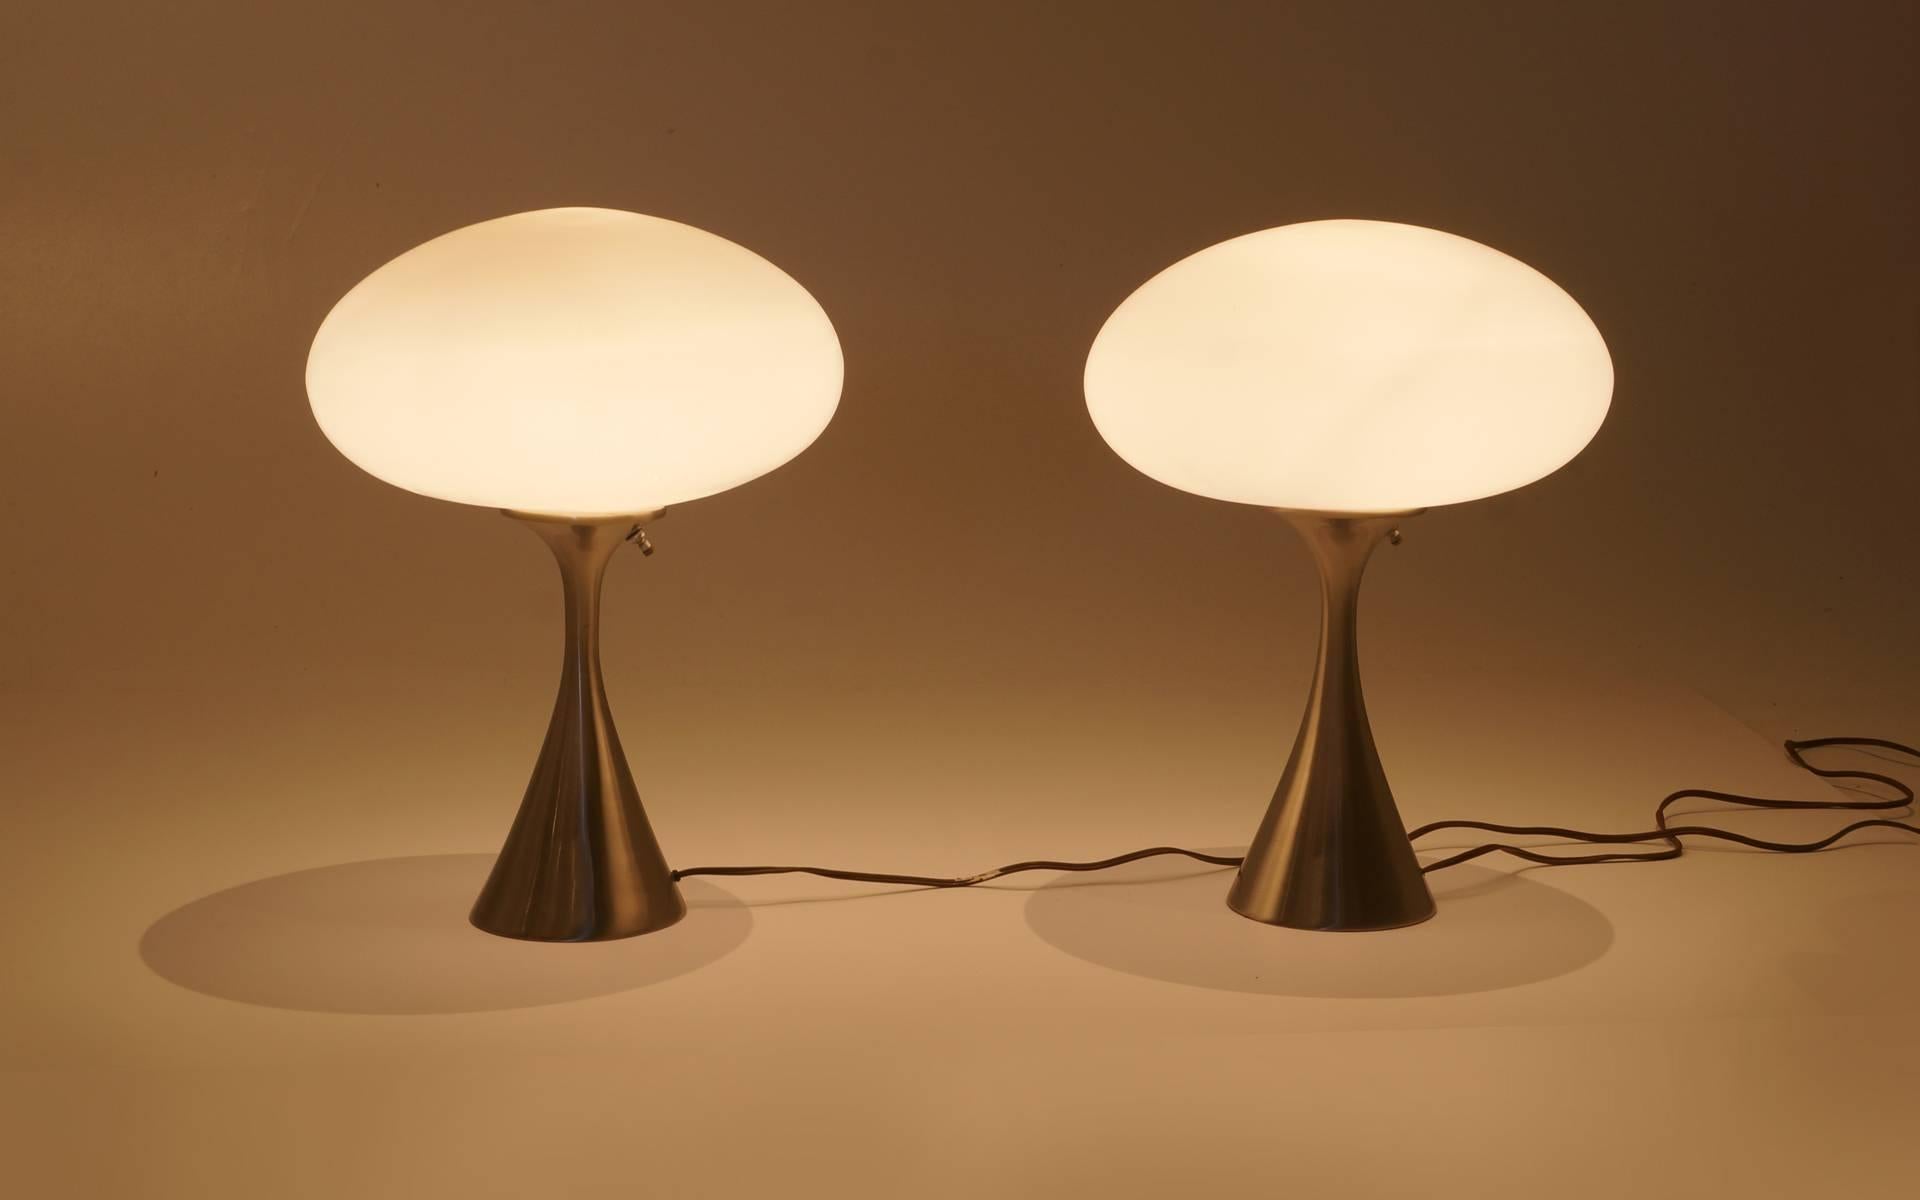 American Pair of Laurel Table Lamps Saucer/Oval Glass Shades, Satin Chrome Bases